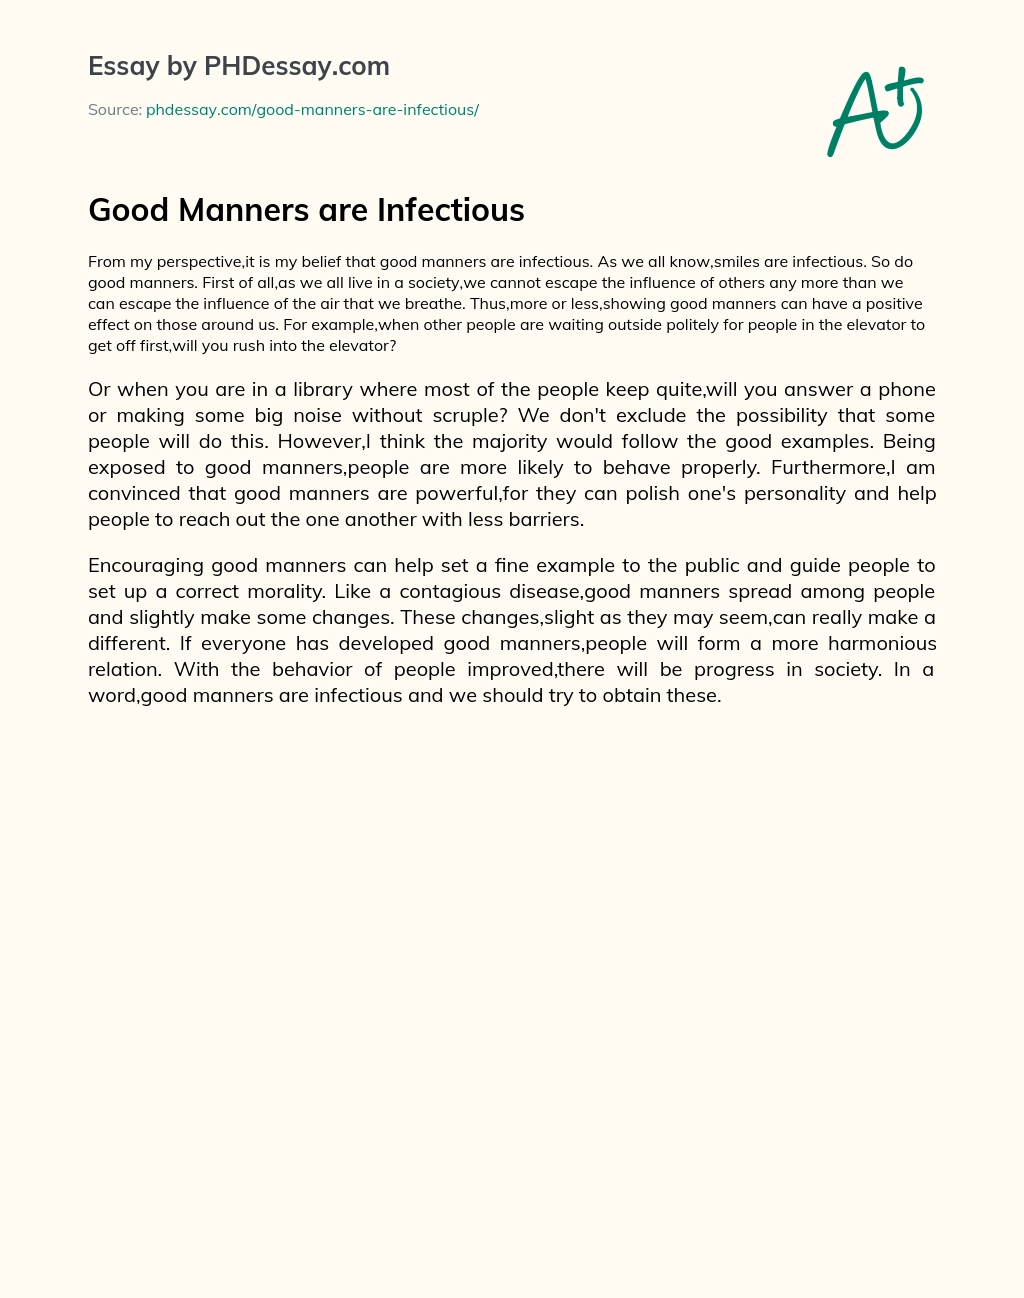 Good Manners are Infectious essay